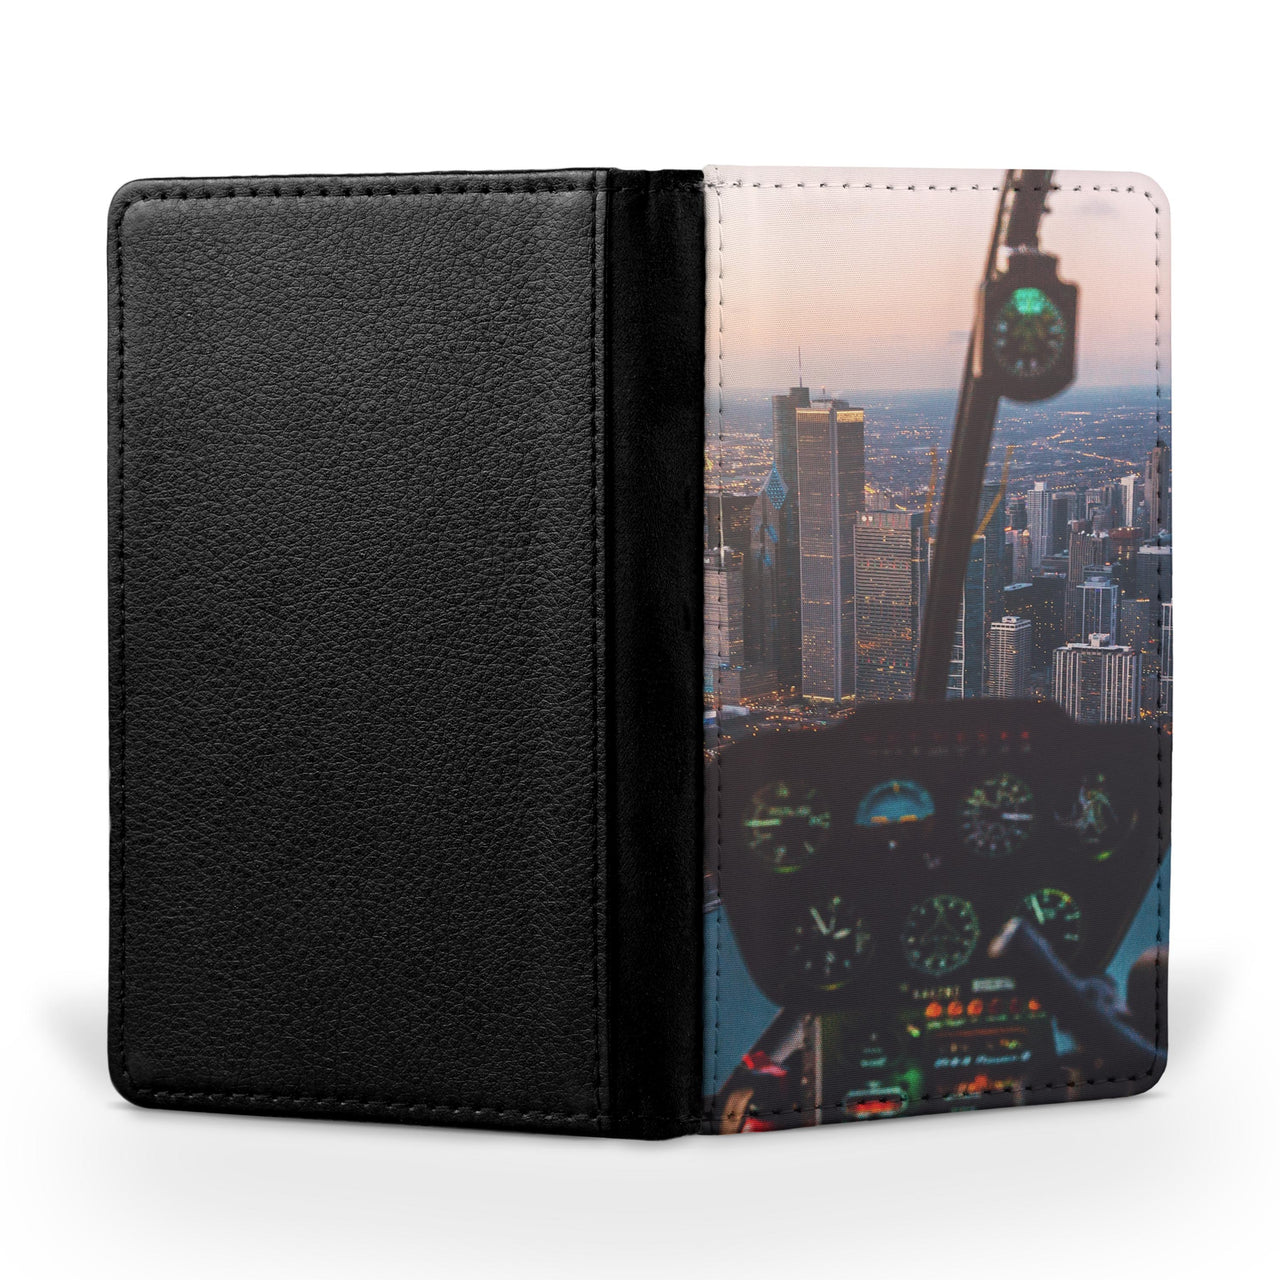 Amazing City View from Helicopter Cockpit Printed Passport & Travel Cases